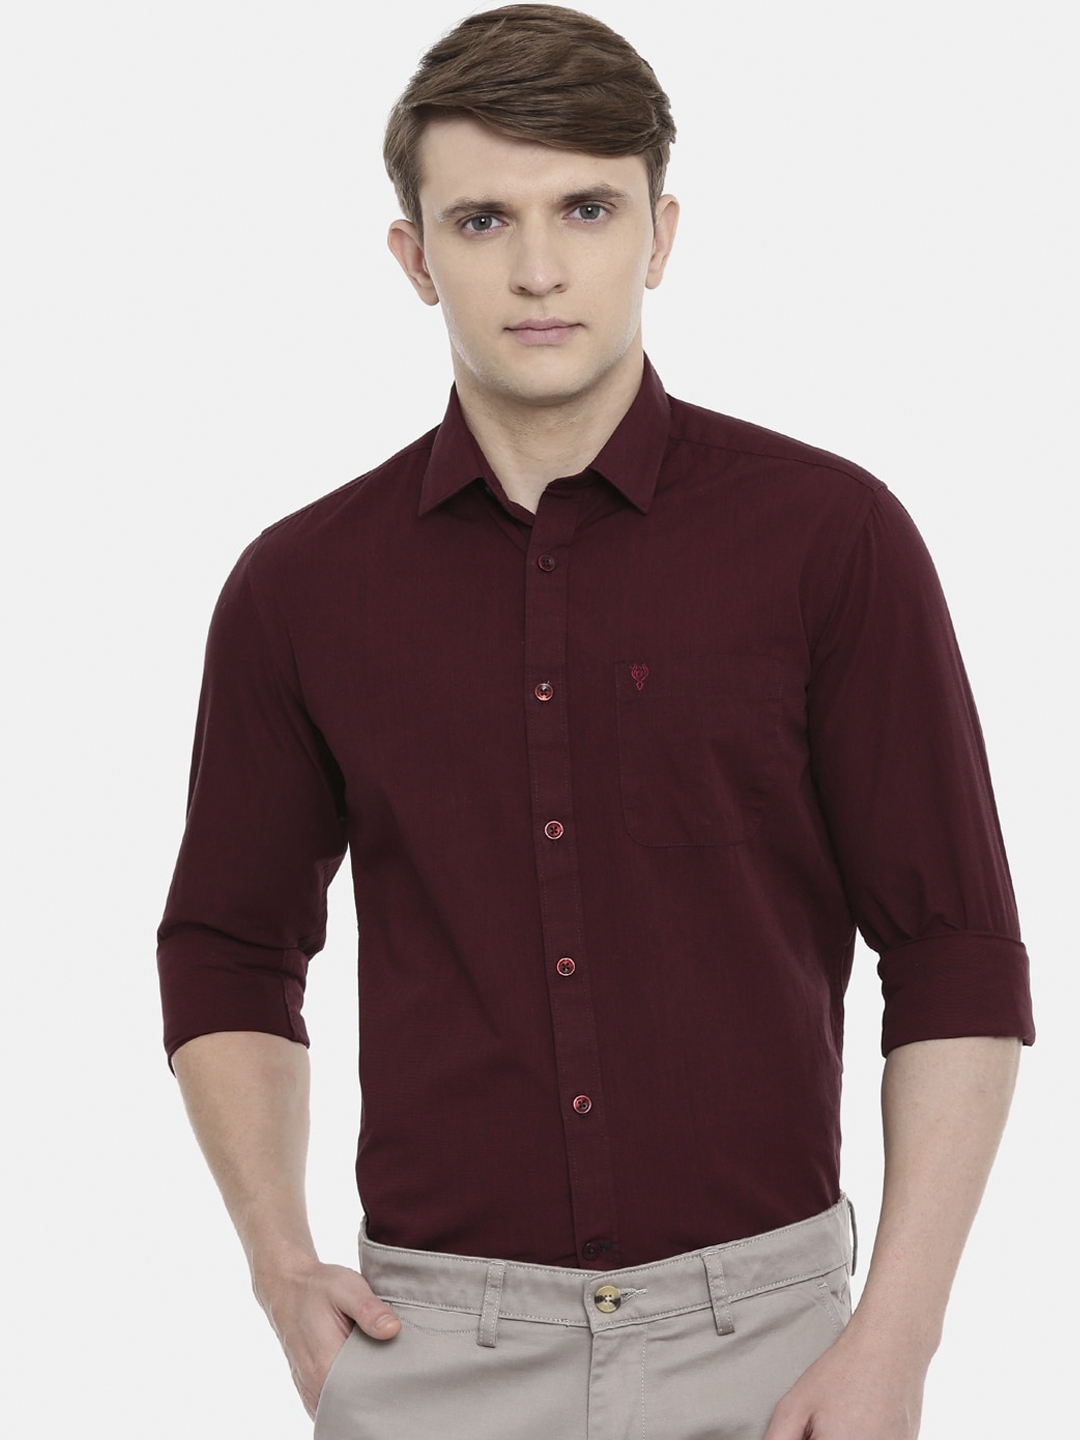 Buy Classic Polo Men Maroon Slim Fit Opaque Cotton Formal Shirt ...